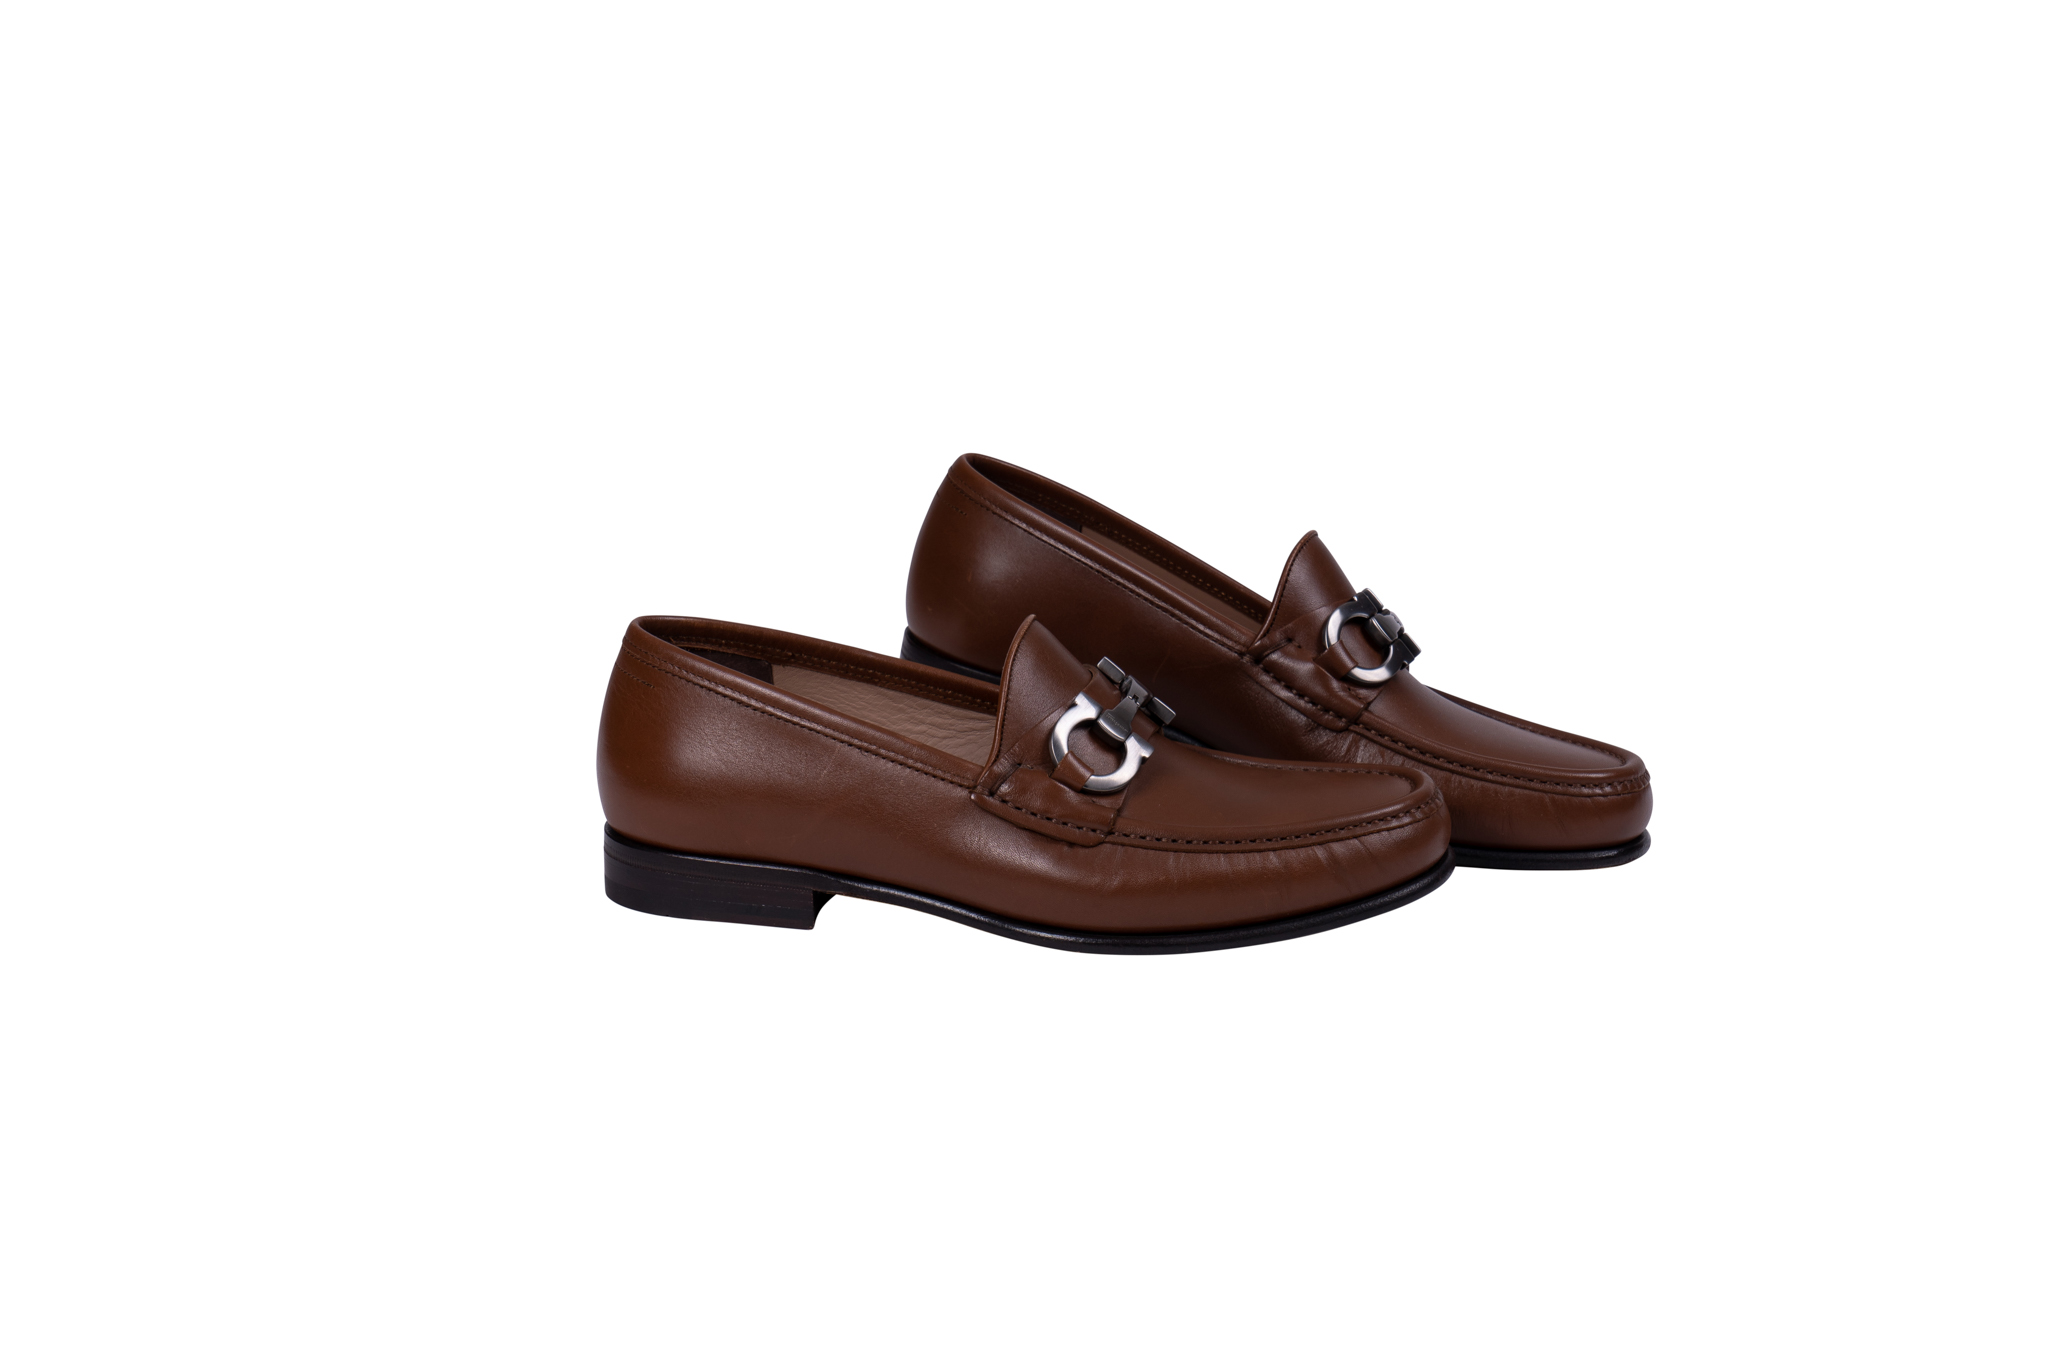 850$ SALVATORE FERRAGAMO Loafer Shoes With Gancini Brown 7 US / 6